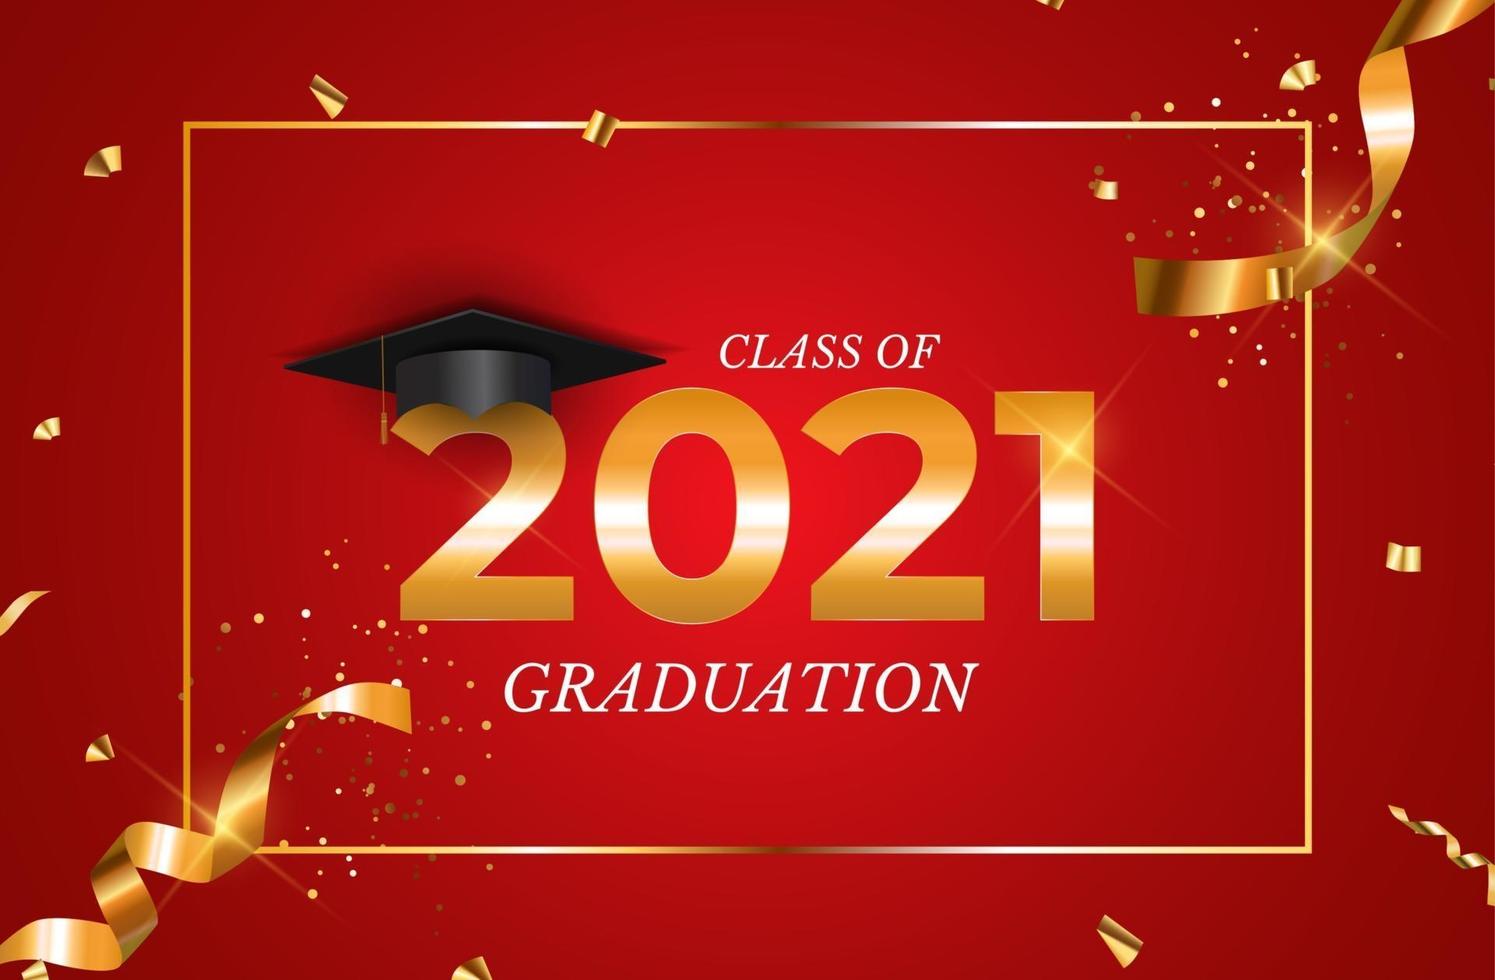 Graduation class of 2021 with graduation cap hat and confetti and golden ribbon. Vector Illustration